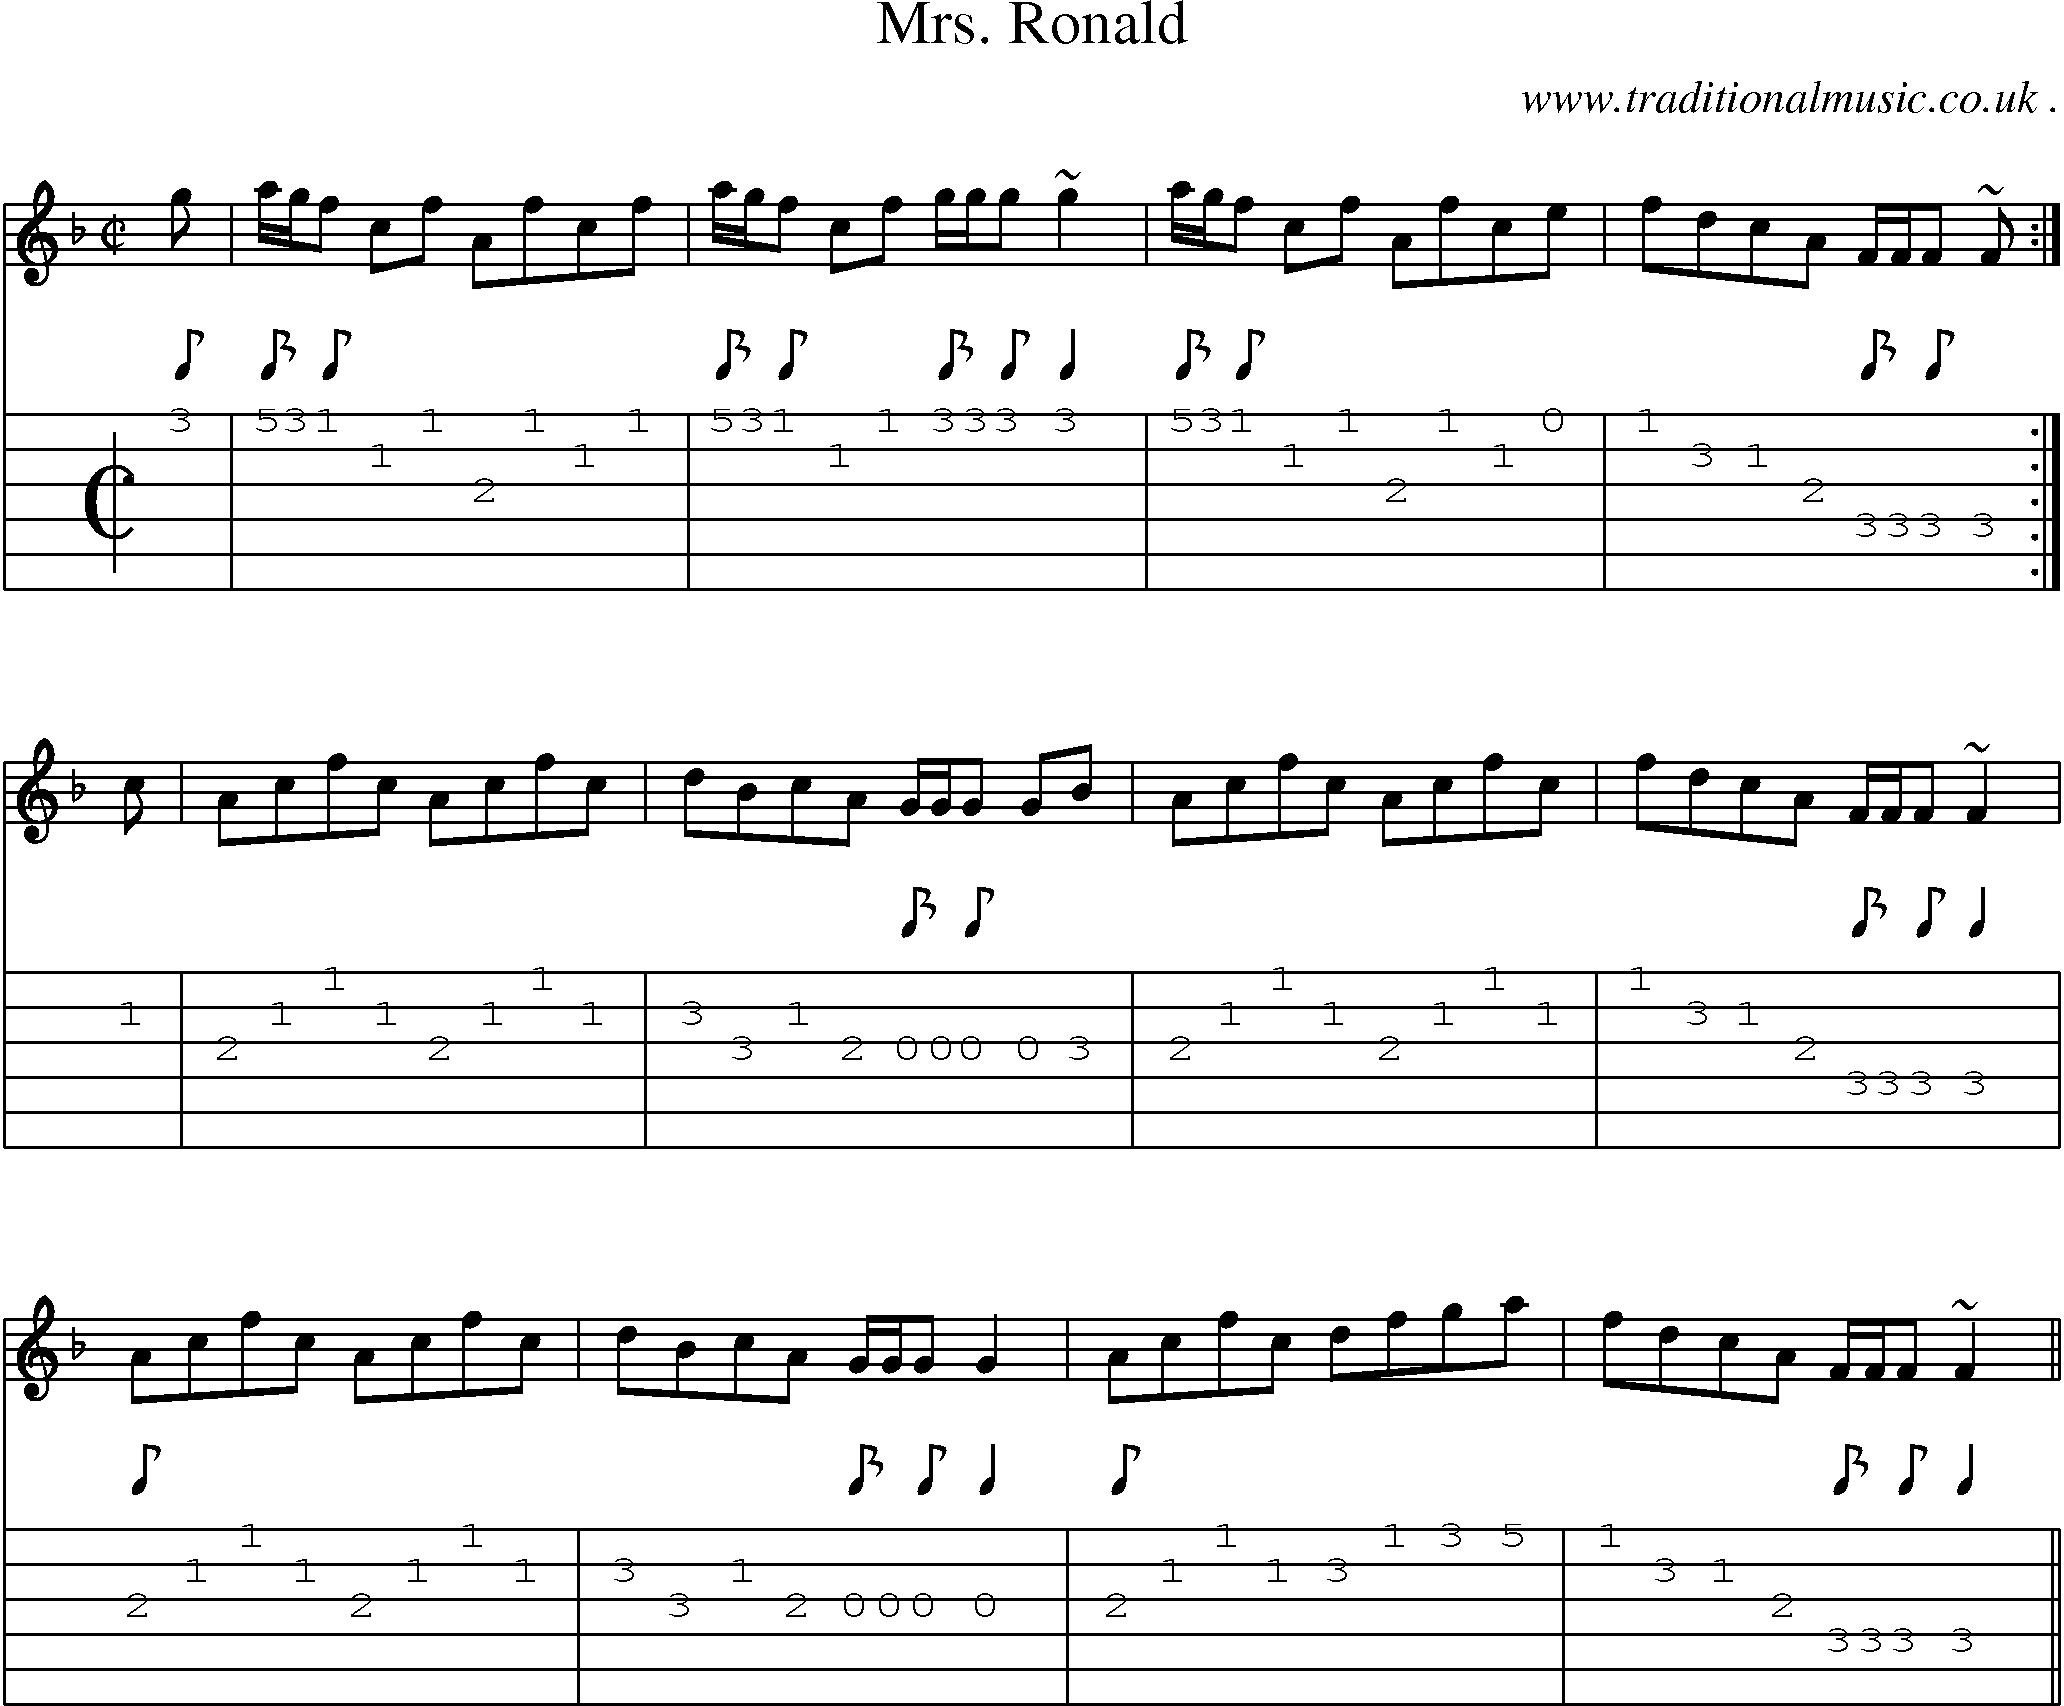 Sheet-music  score, Chords and Guitar Tabs for Mrs Ronald